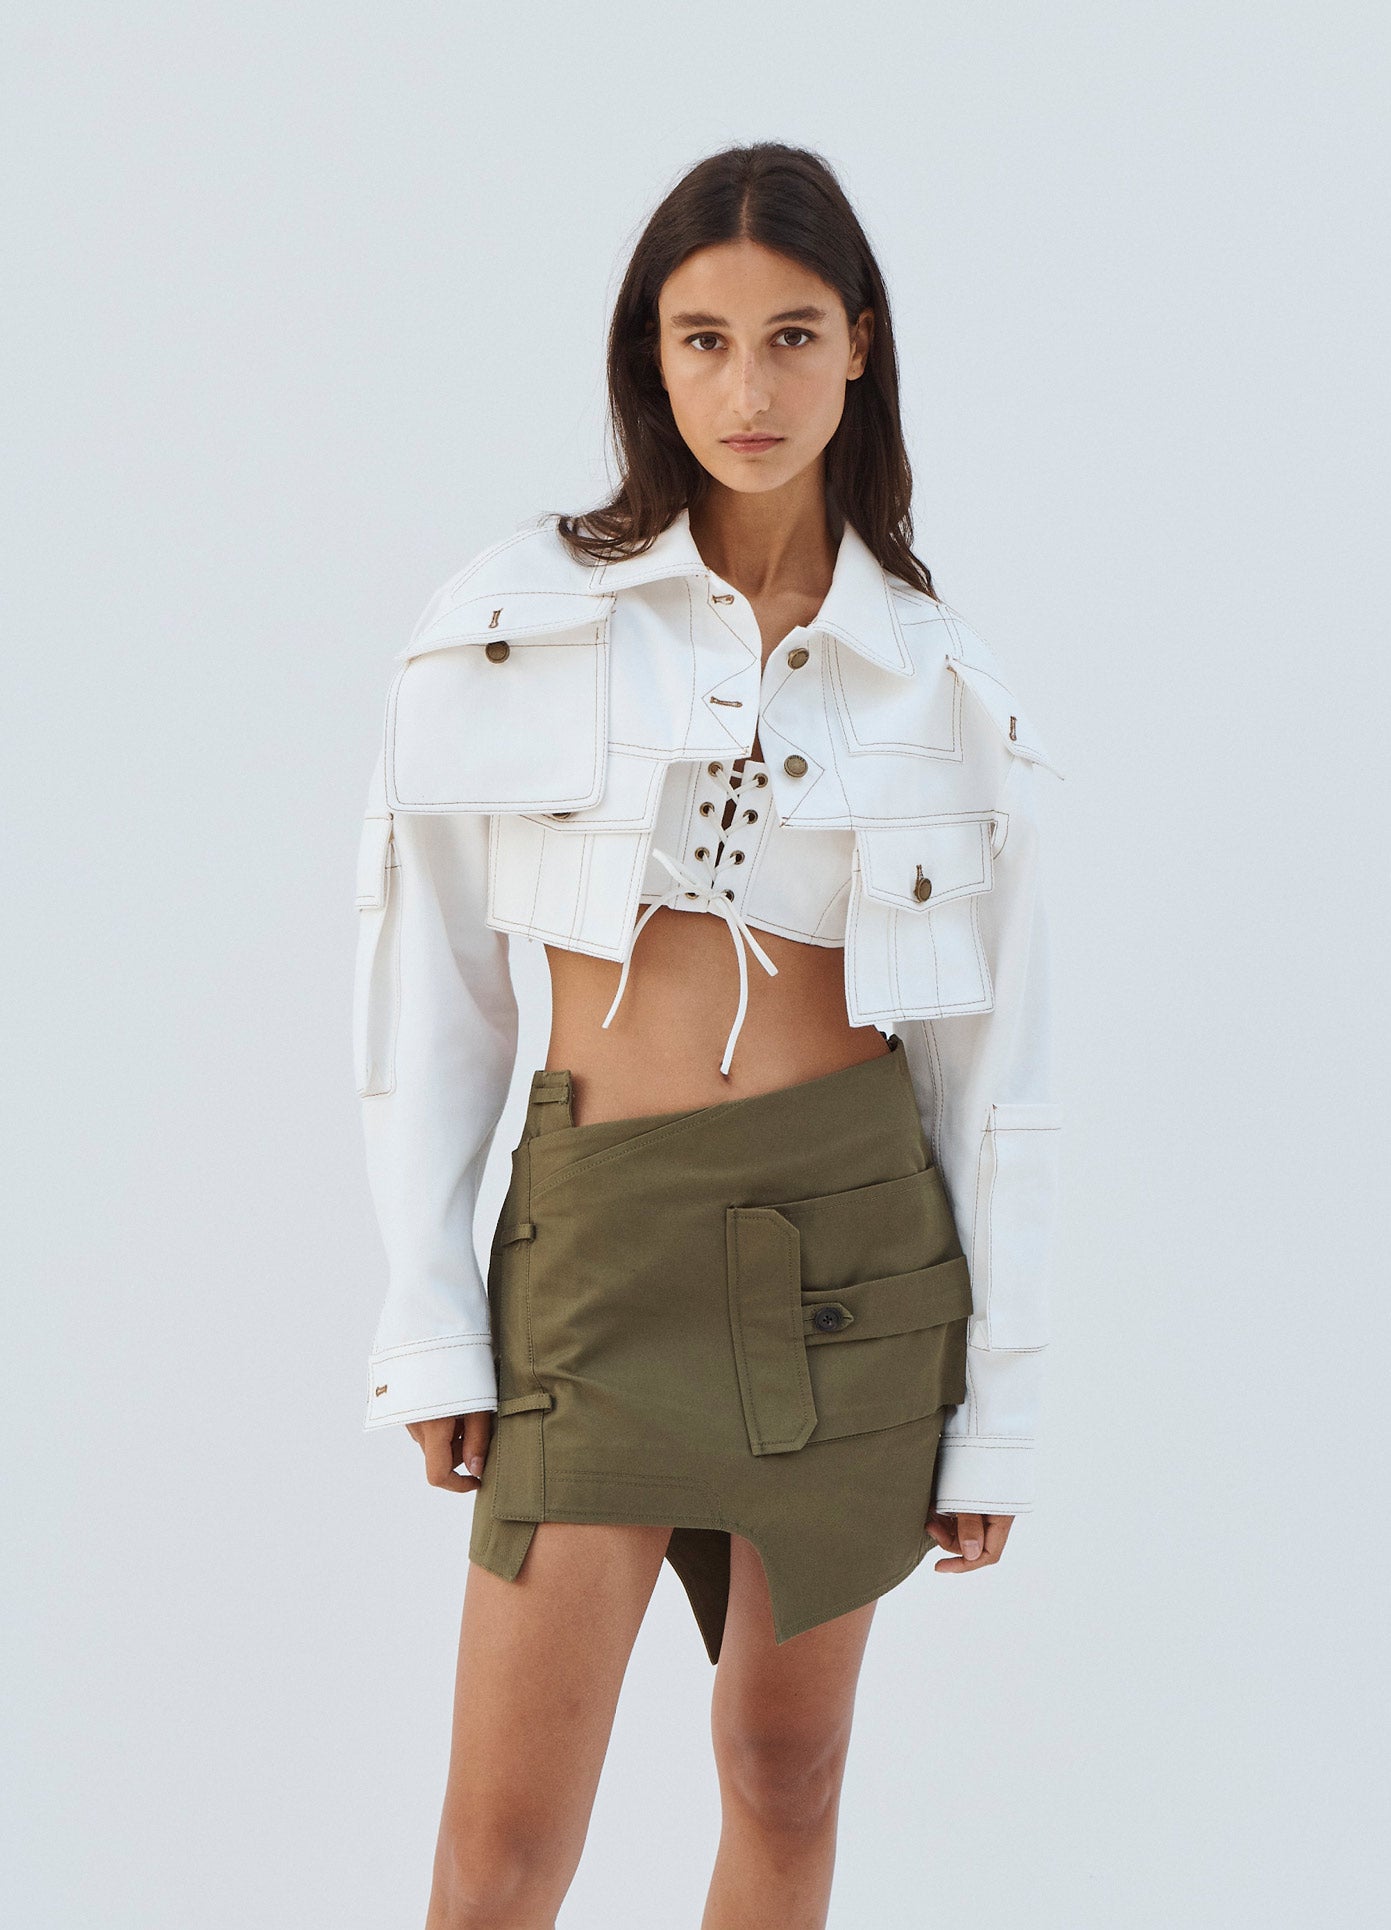 MONSE Deconstructed Trouser Mini Skirt with Pockets in Olive Front View